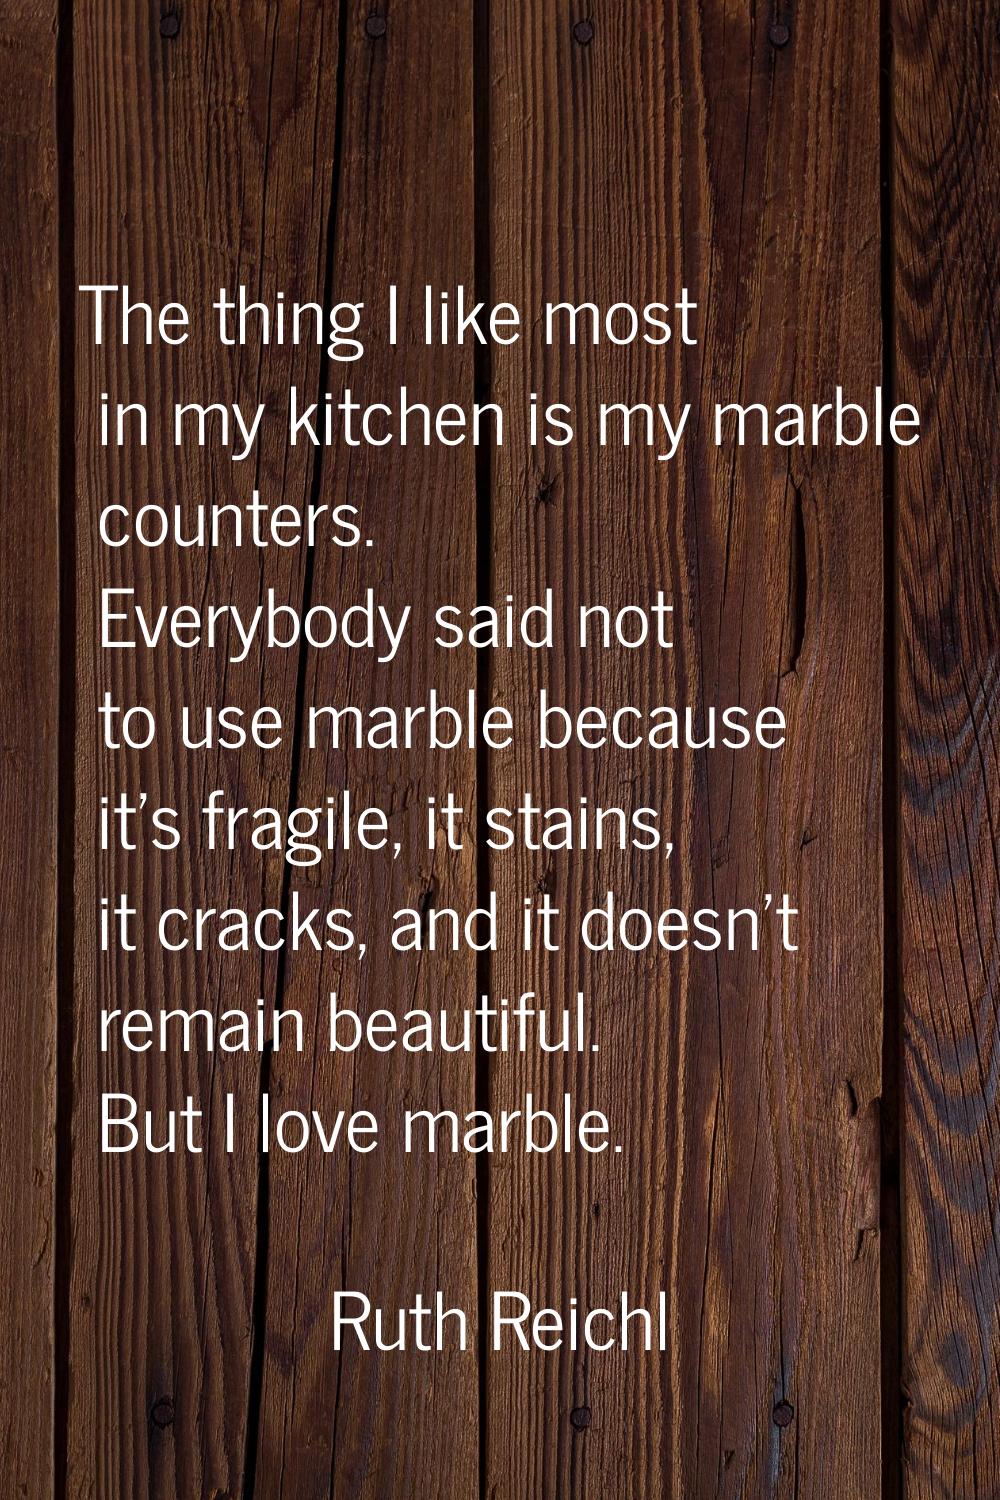 The thing I like most in my kitchen is my marble counters. Everybody said not to use marble because